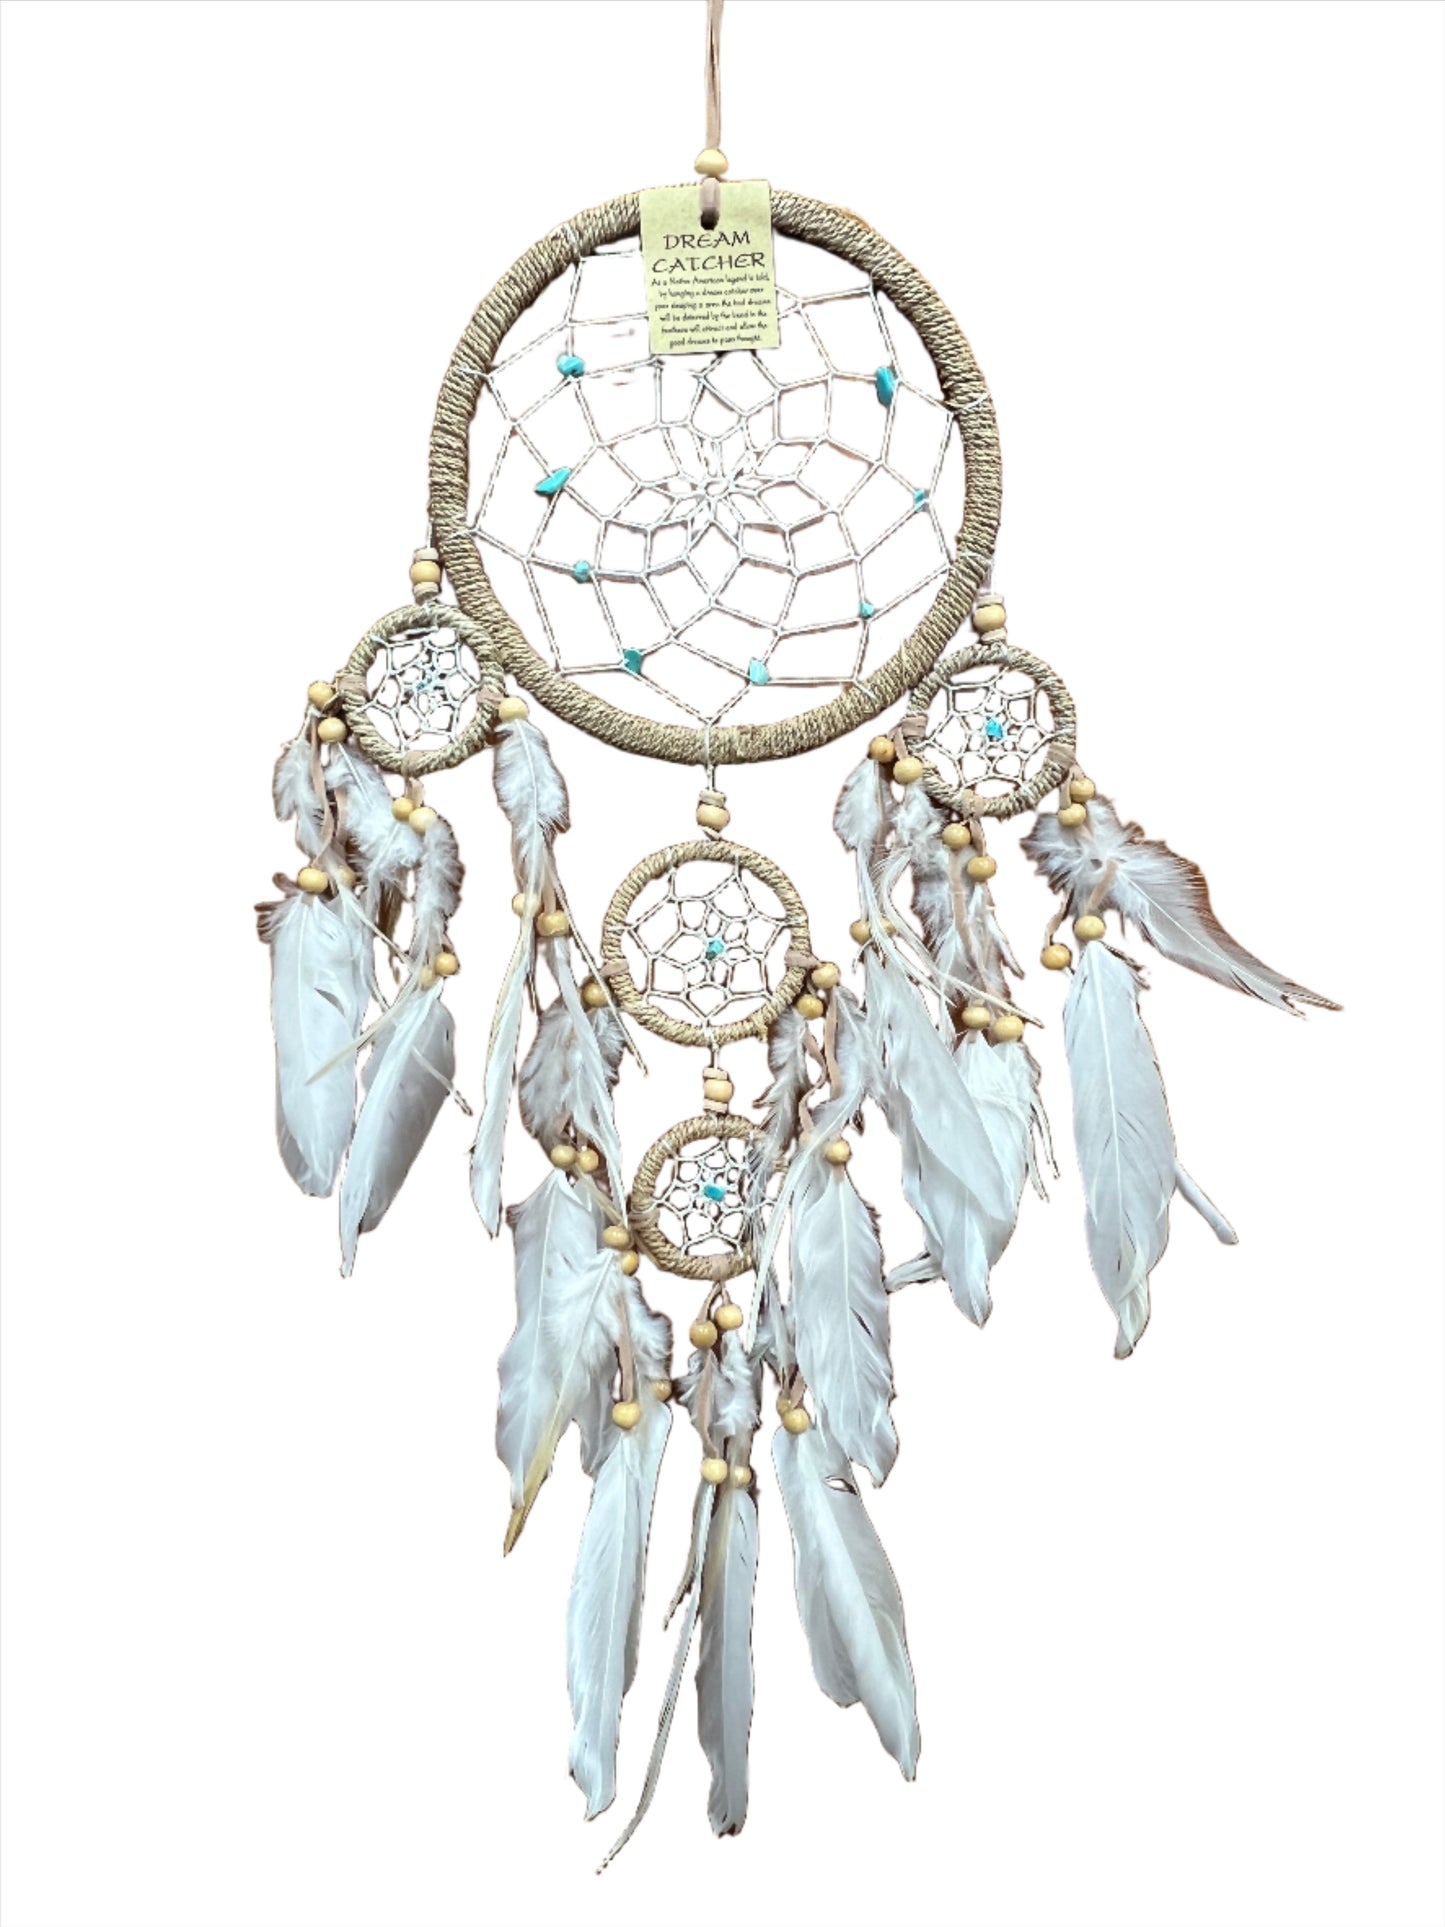 Turquoise Chip Dream Catcher with Swan Feathers